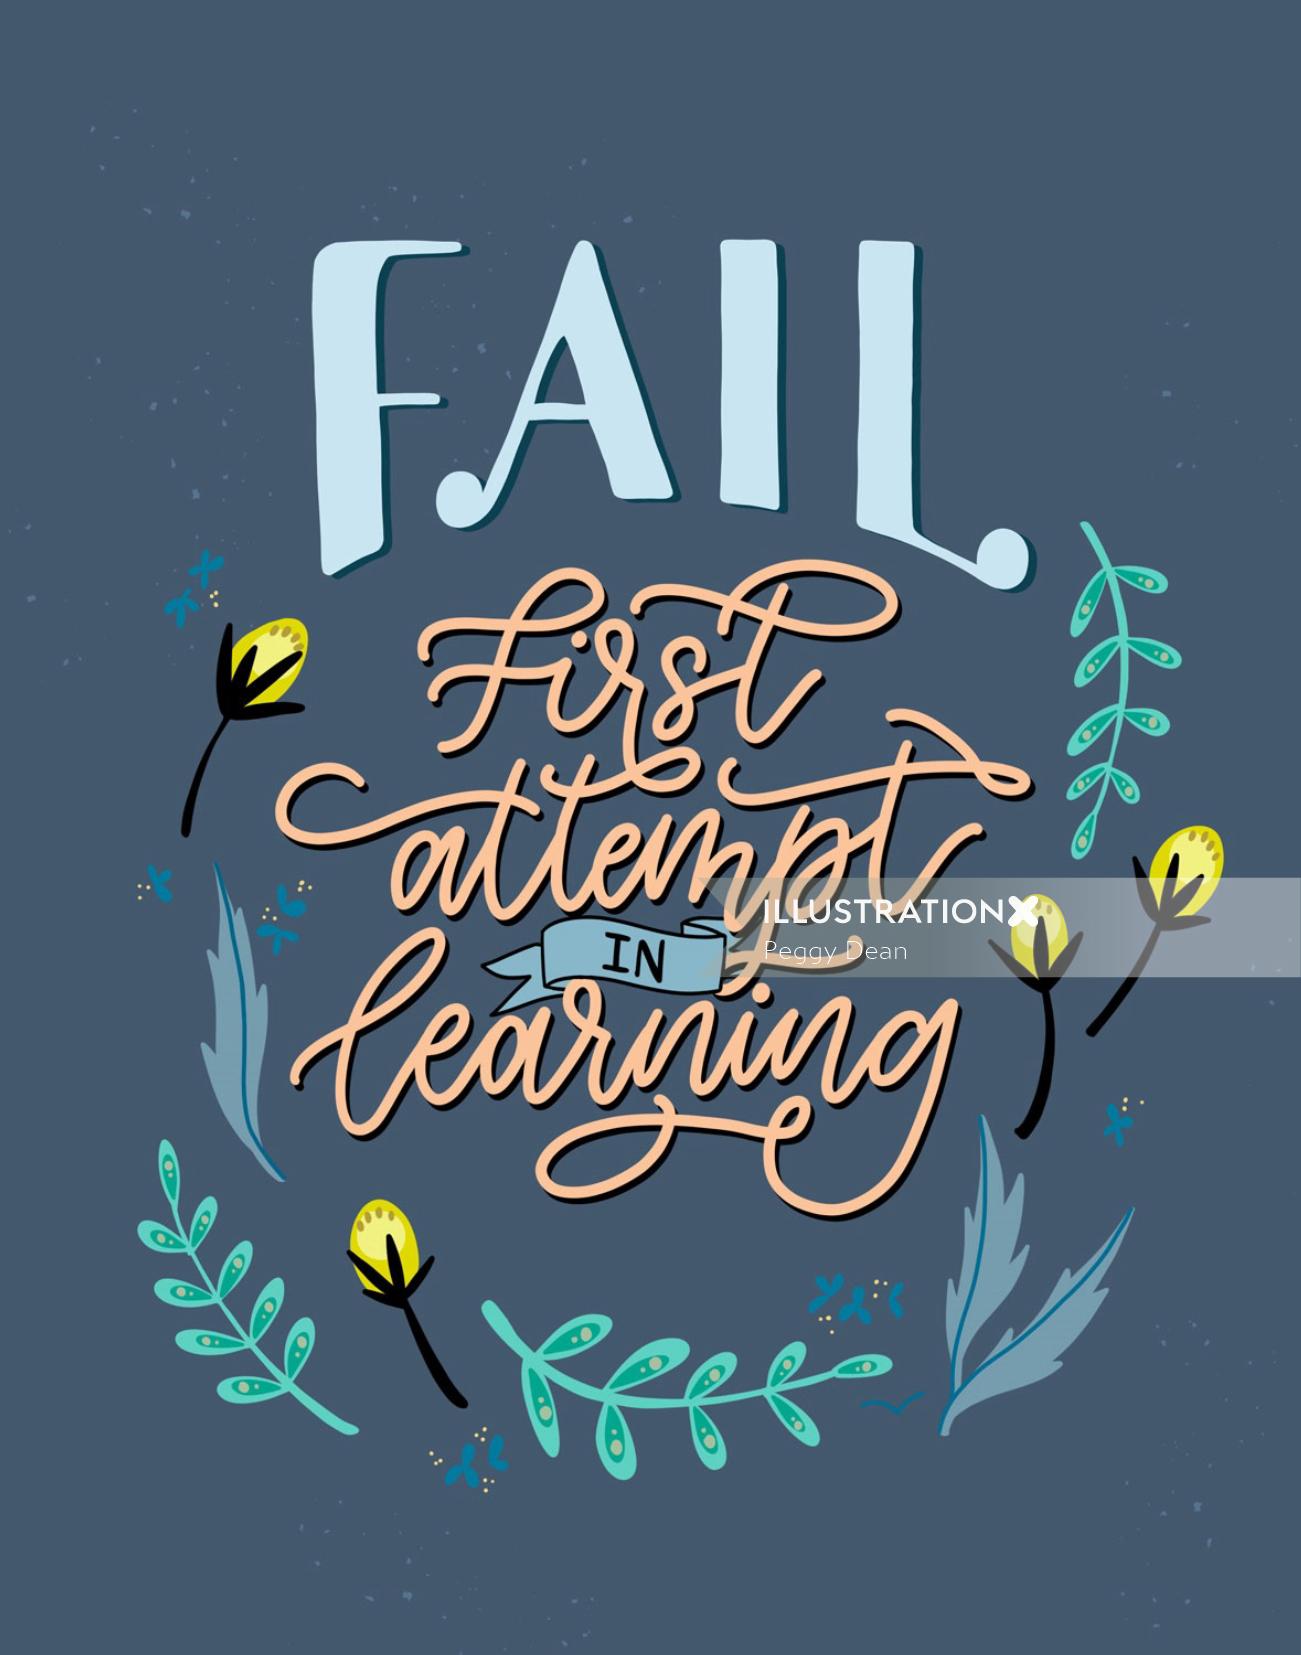 Fail first attempt is learning calligraphy 